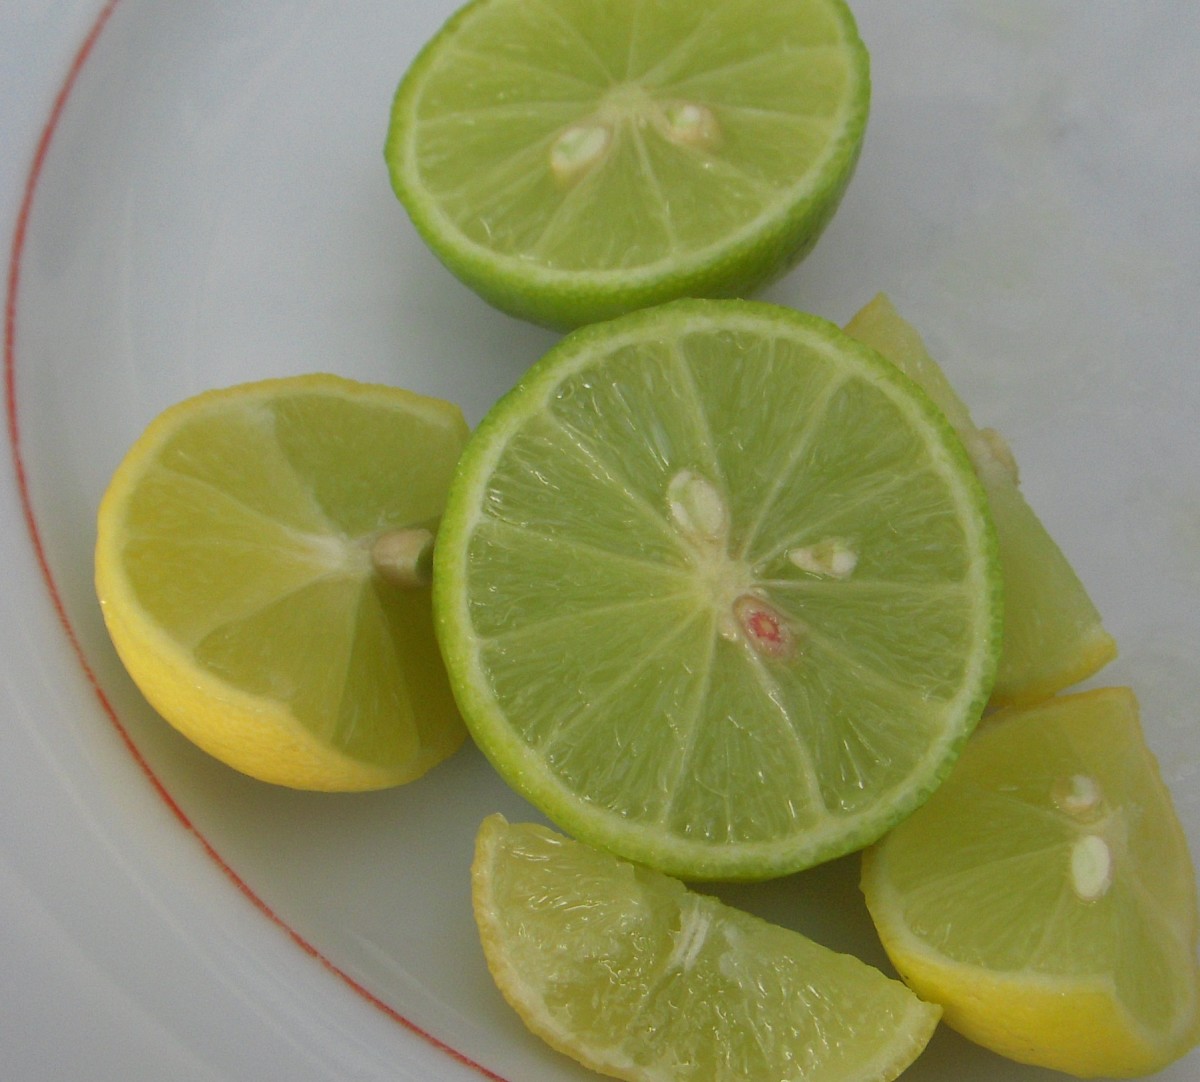 Key lime fruit has a yellow skin when ripe. The fruit is smaller than a regular lime, and seedy.